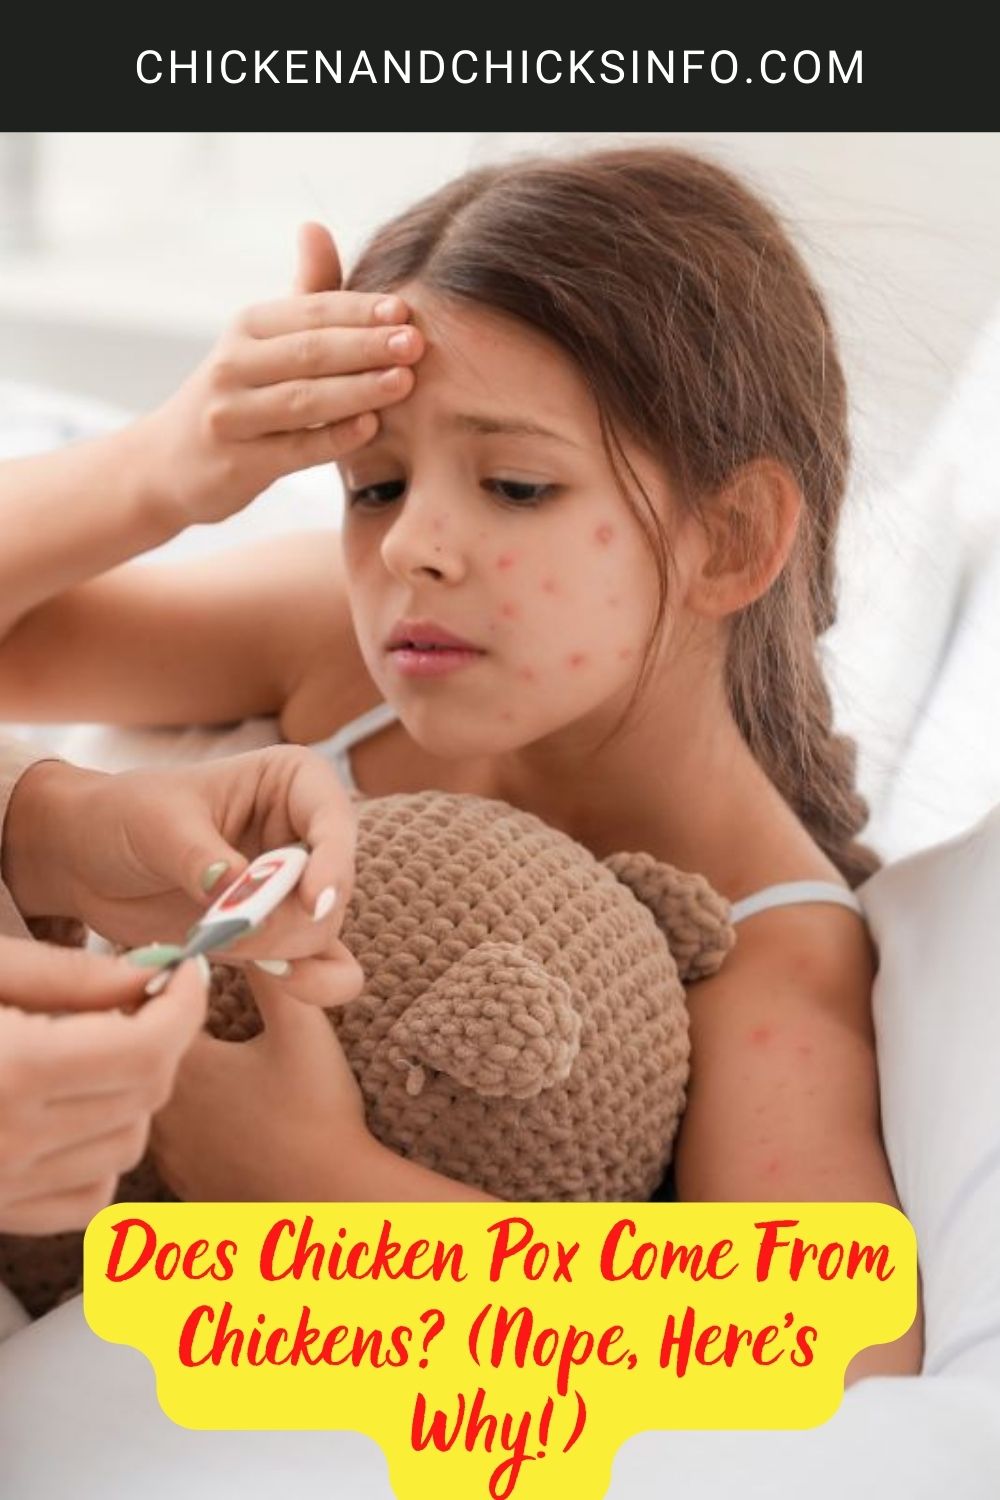 Does Chicken Pox Come From Chickens? (Nope, Here's Why!) poster.